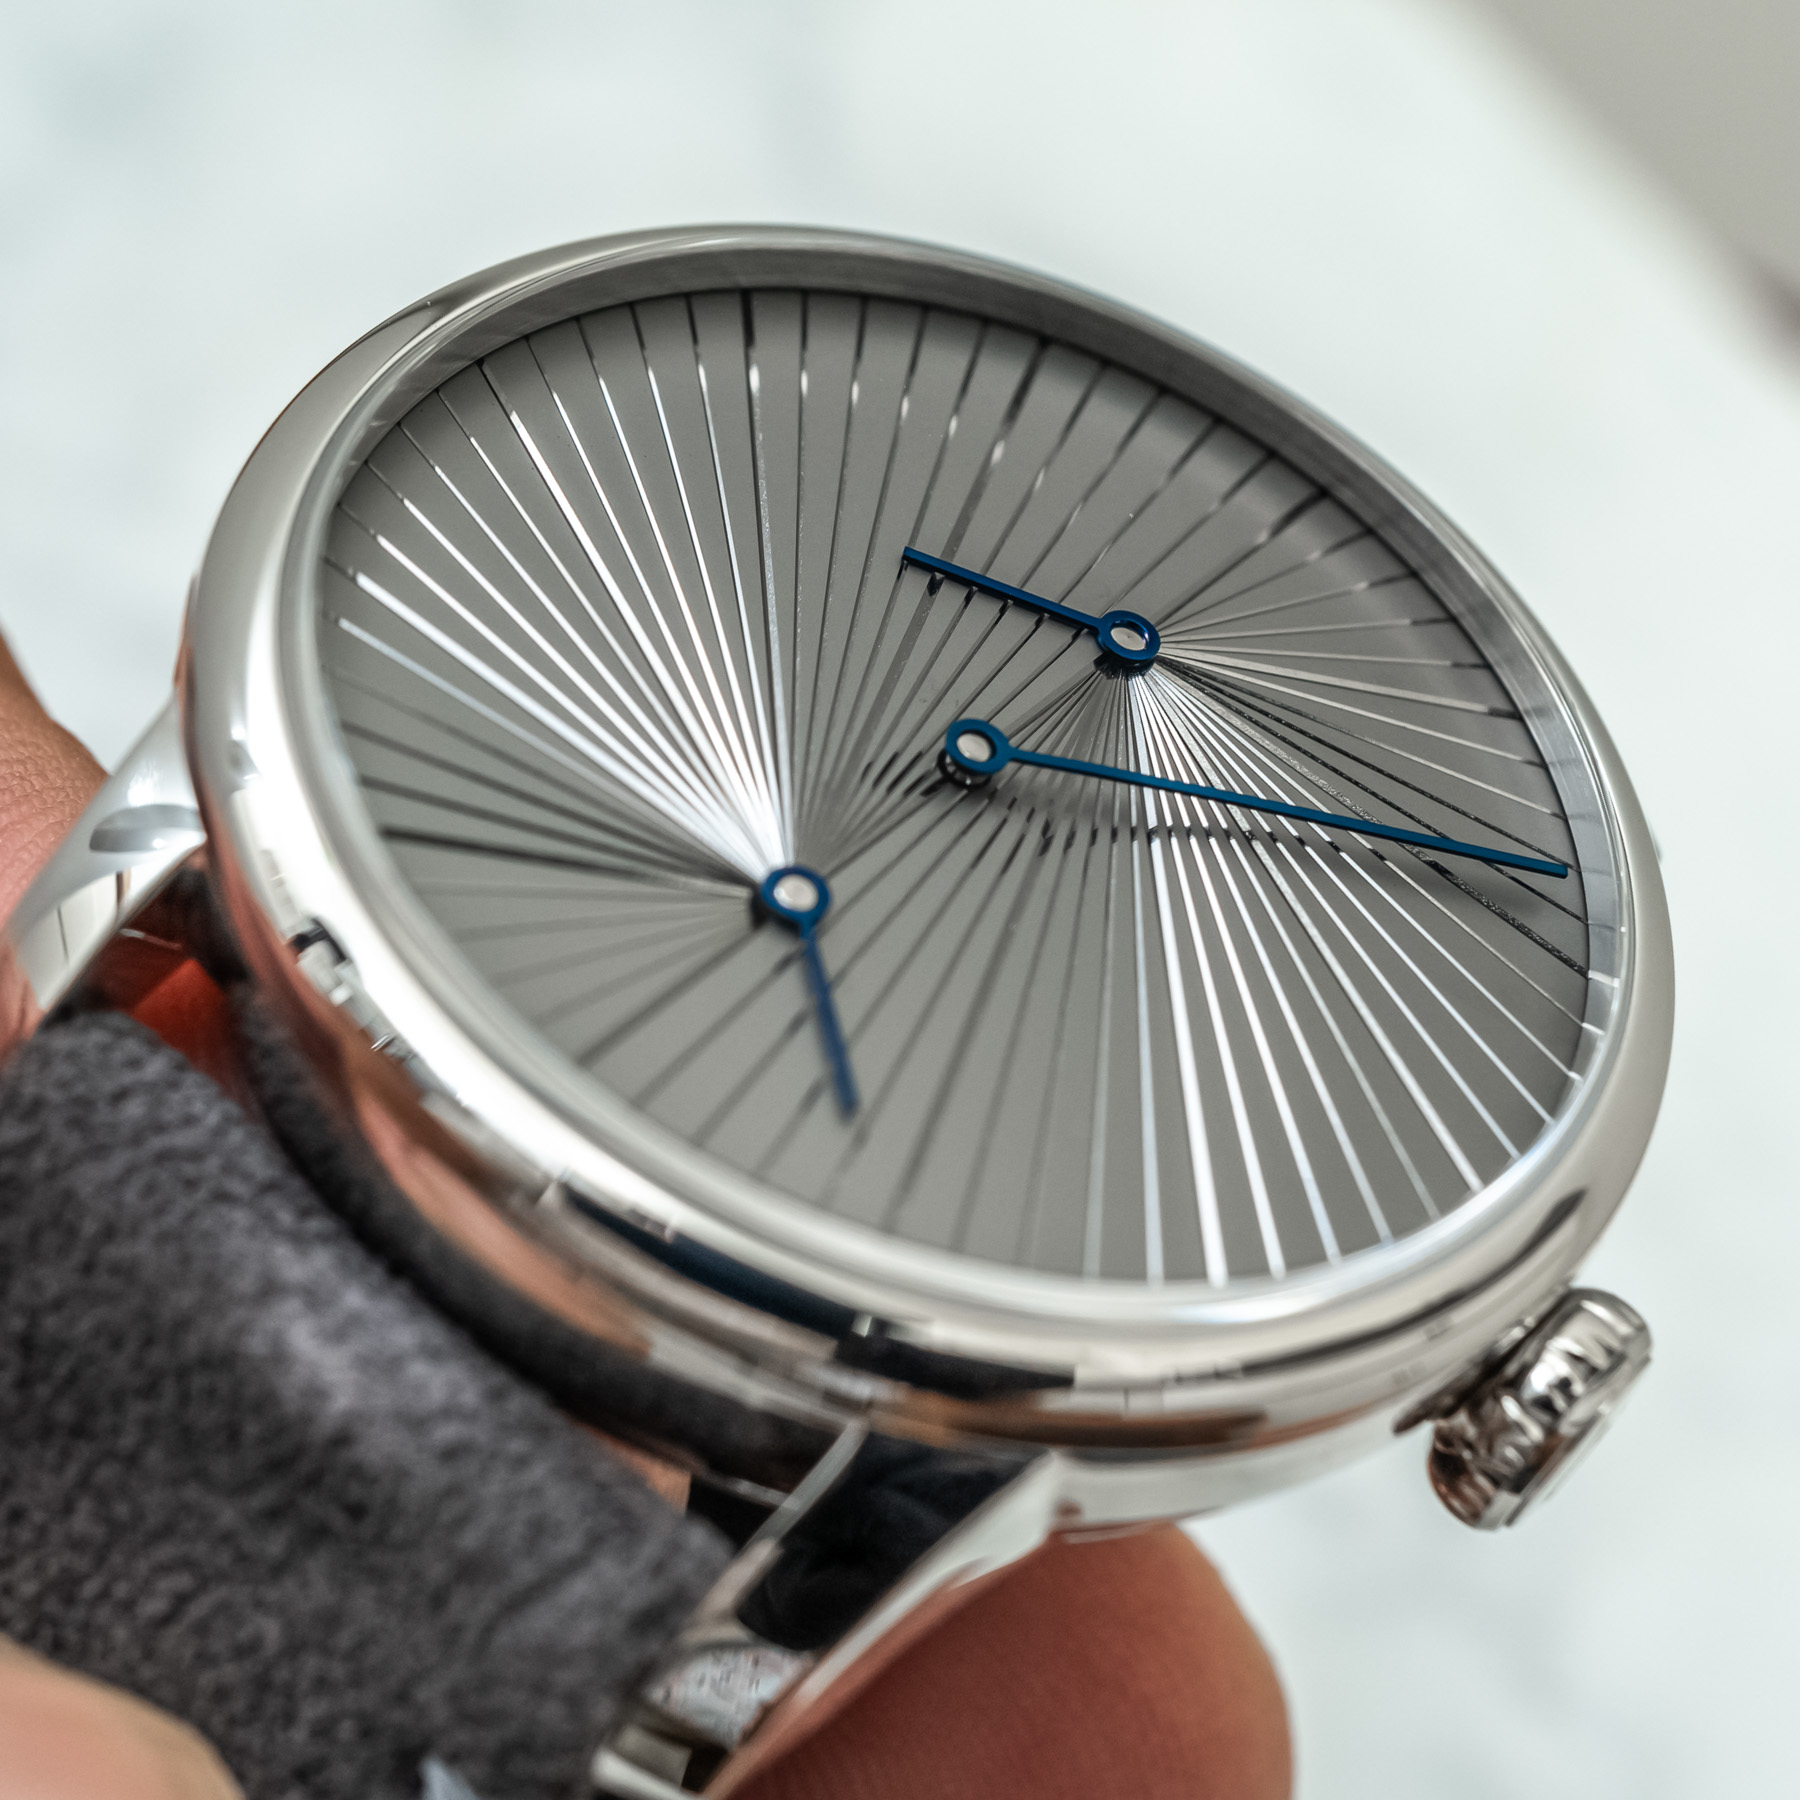 The Louis Erard Excellence Skeleton  A Review of the Louis Erard Skeleton